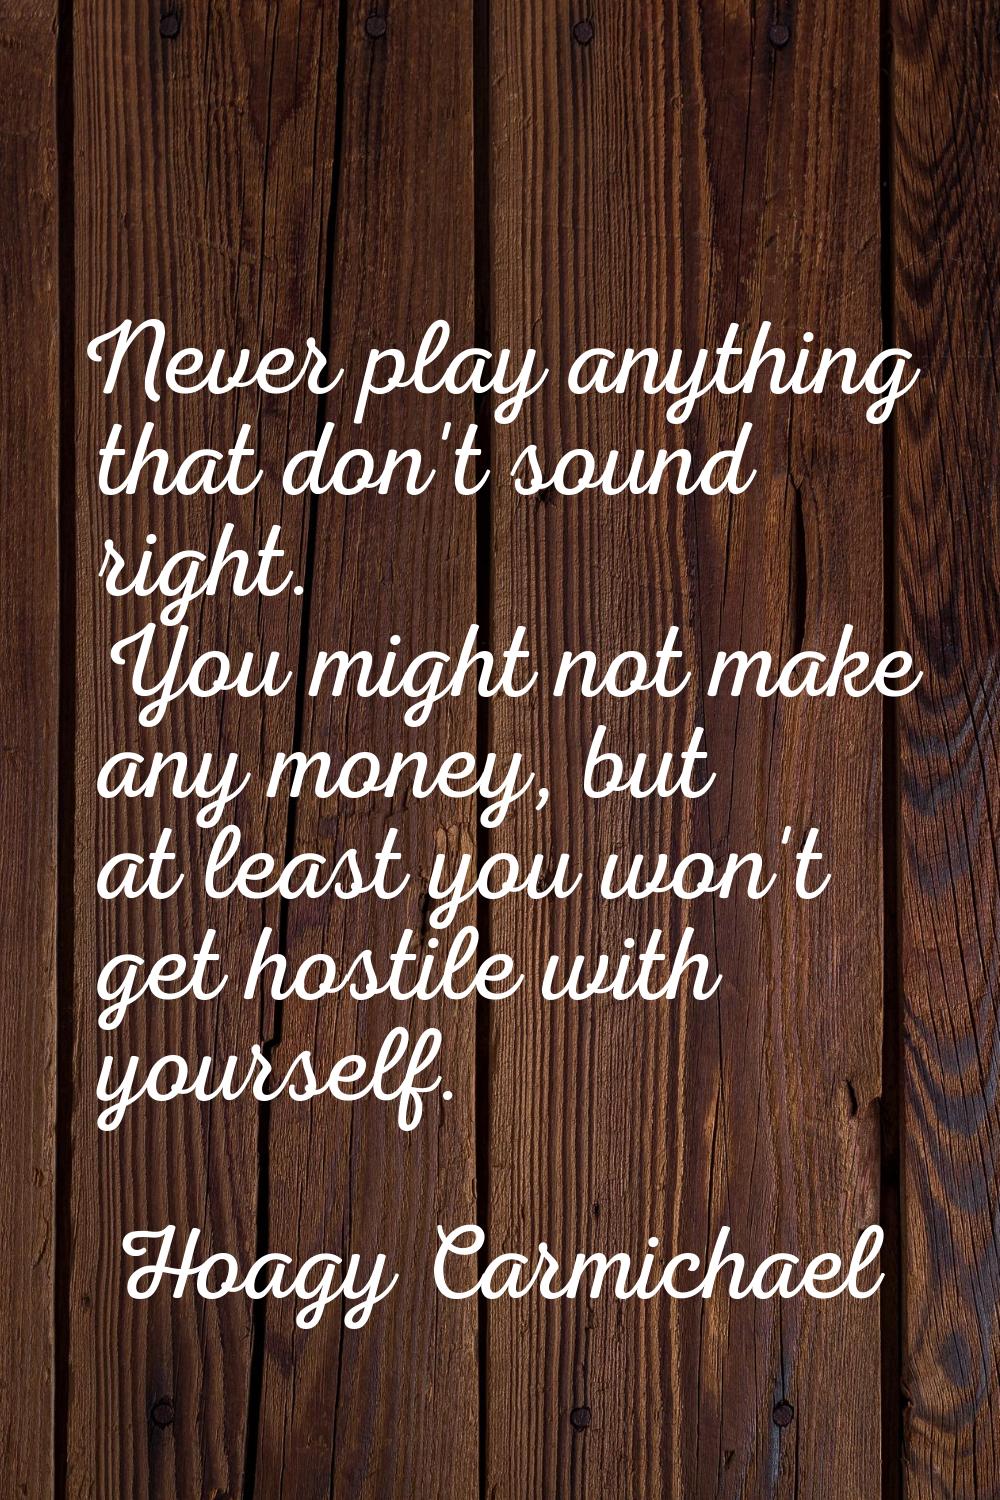 Never play anything that don't sound right. You might not make any money, but at least you won't ge